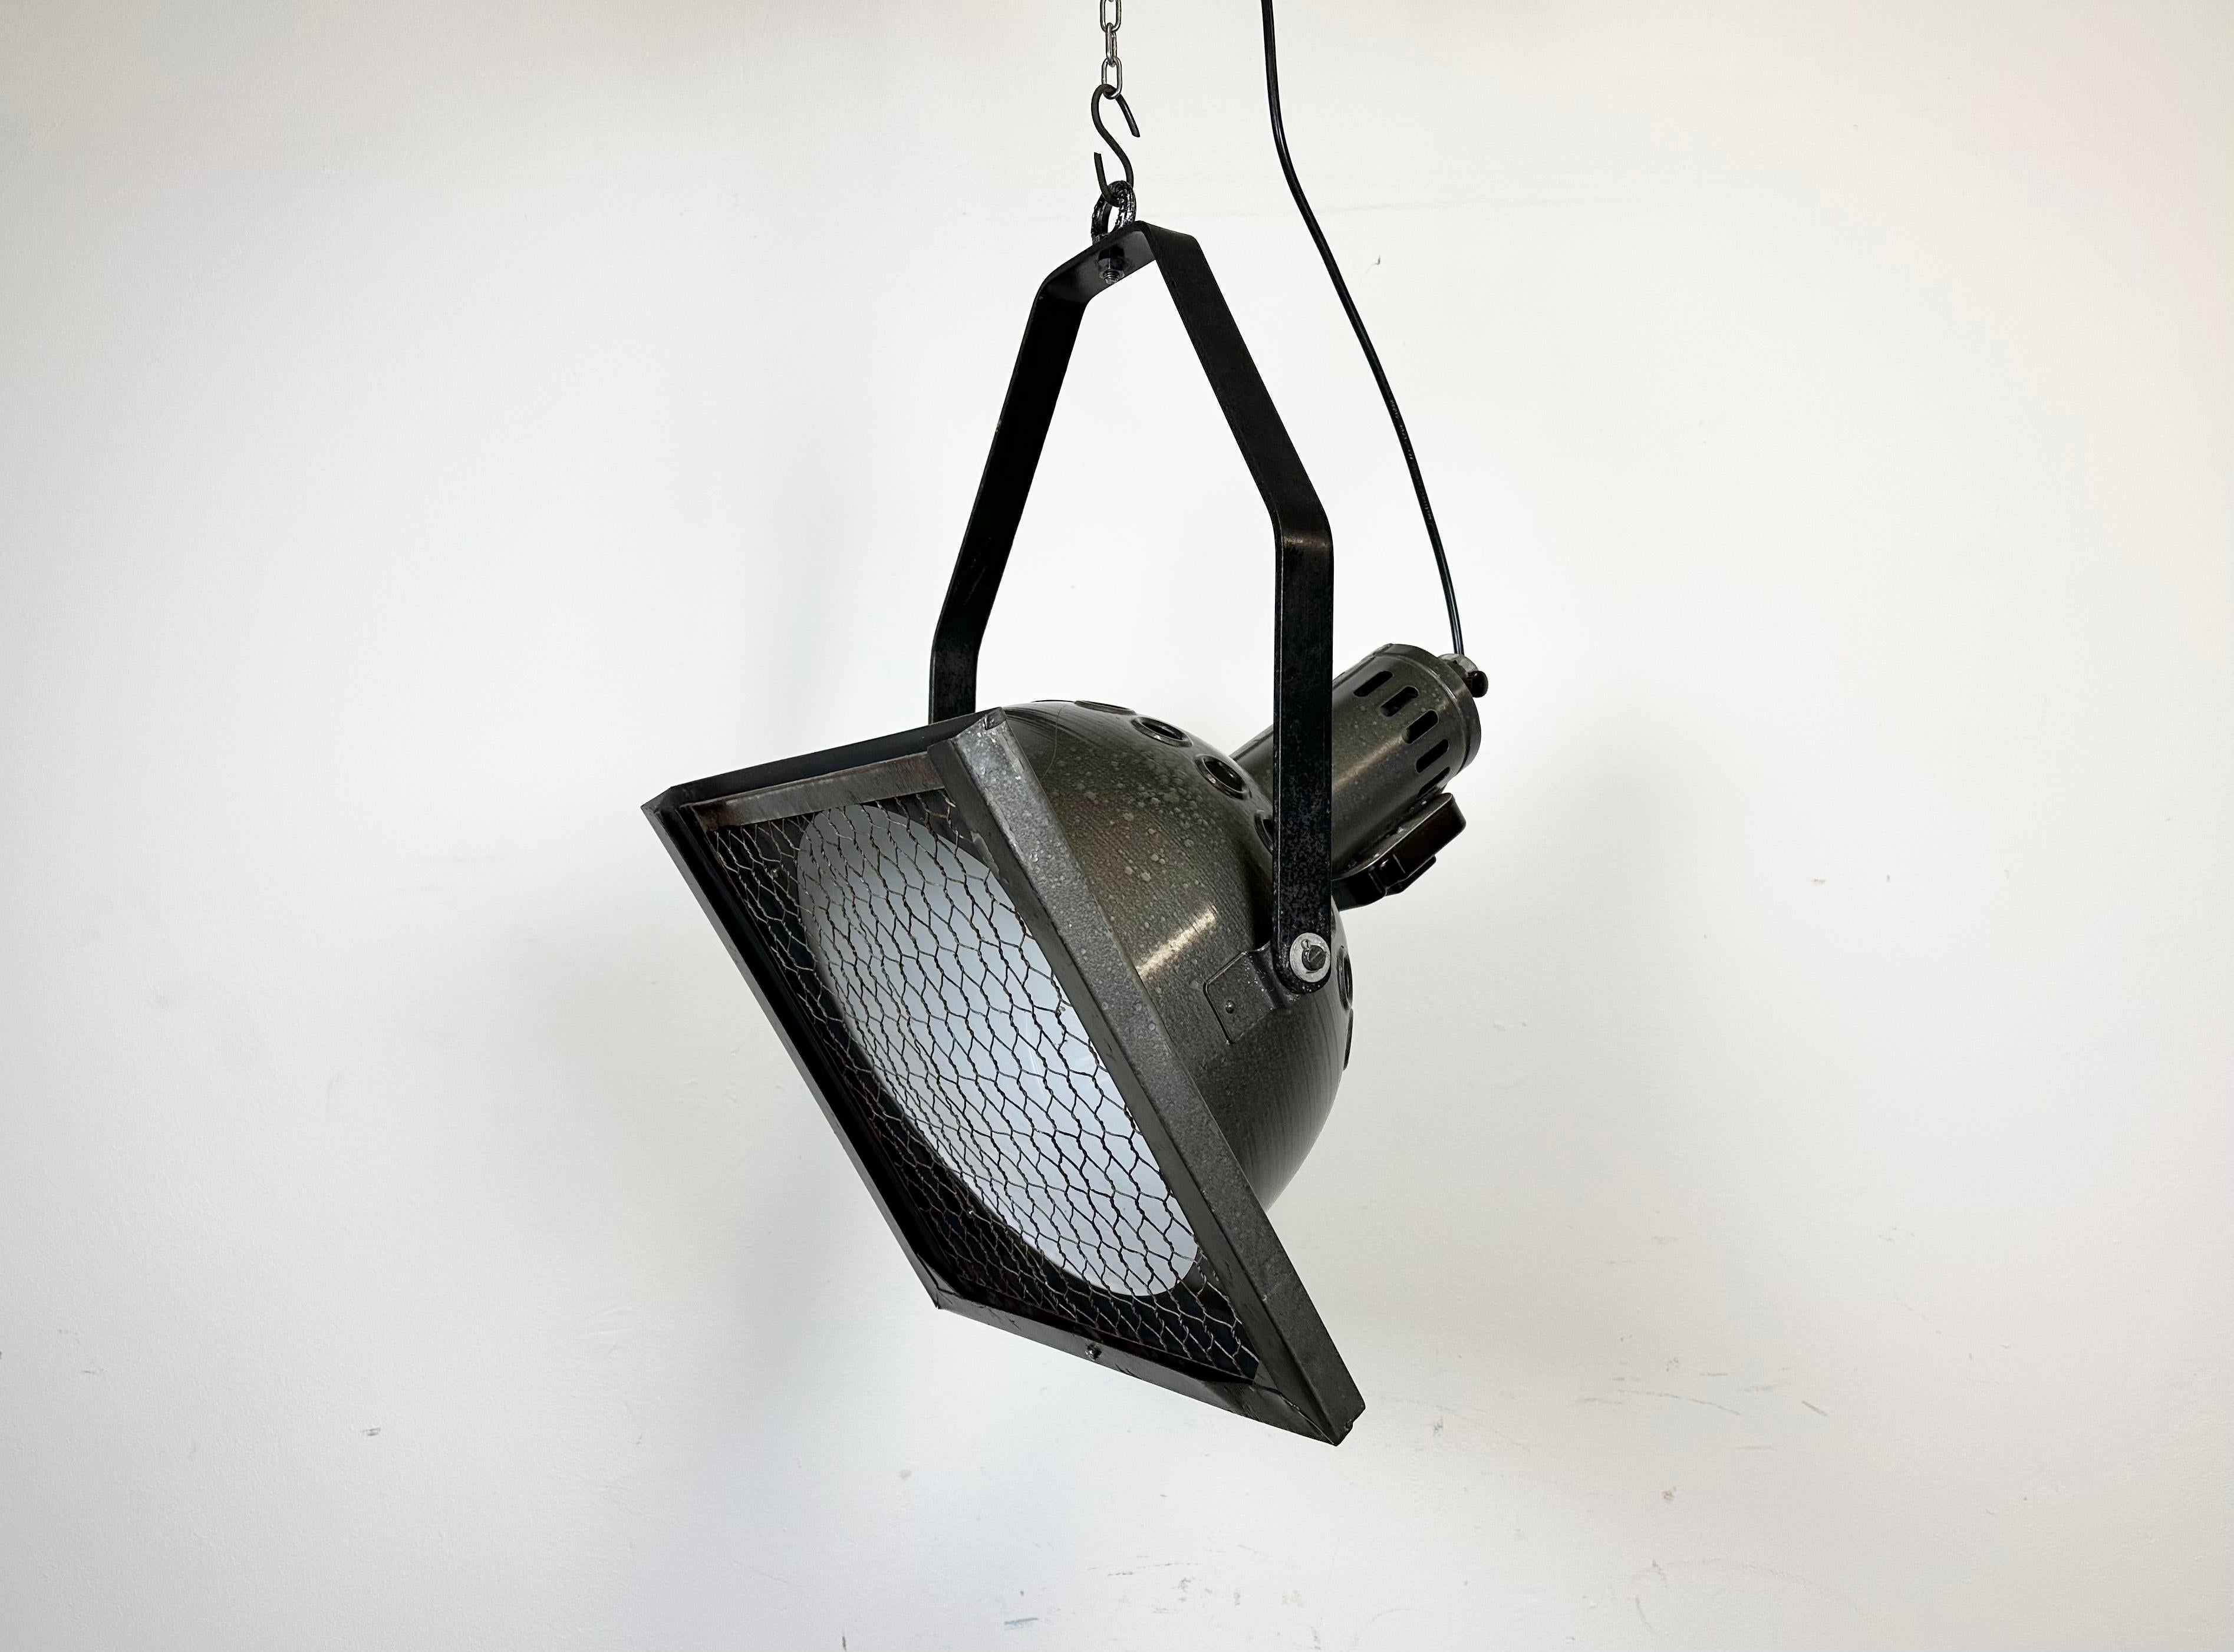 - Vintage theatre spotlight made by Elektrosvit in former Czechoslovakia during the 1970s.
- It features a grey hammerpaint metal body with white interior and iron grid.
- Adjustable angle
- The porcelain socket requires E27/ E26 lightbulbs 
- New